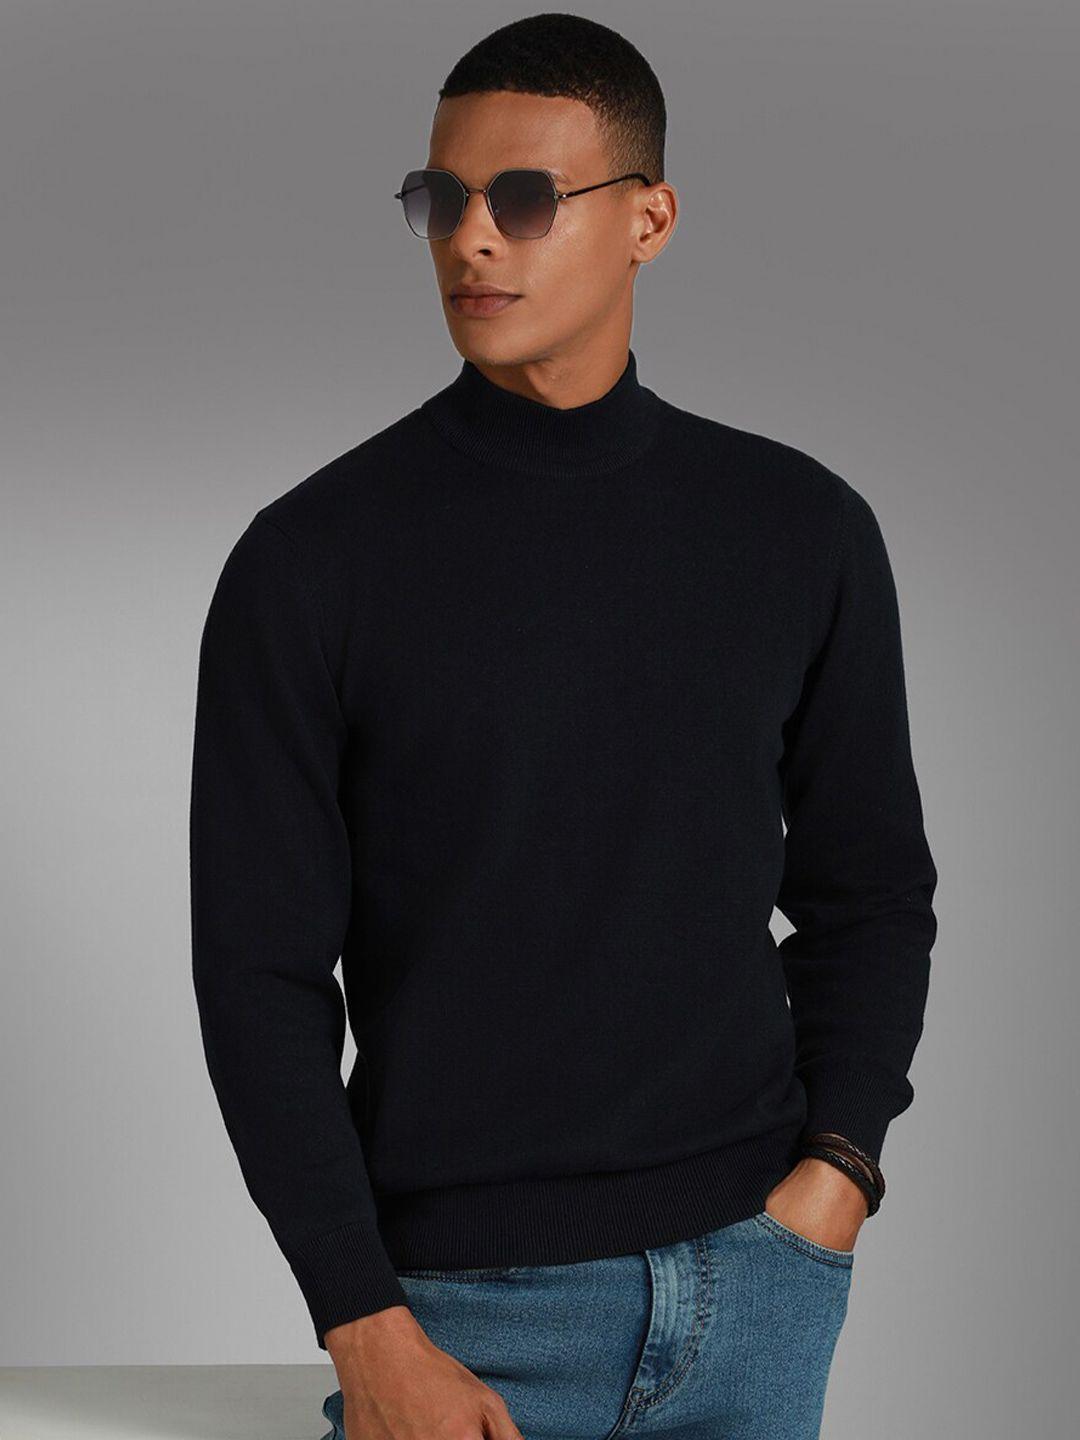 high-star-turtle-neck-long-sleeves-cotton-pullover-sweater